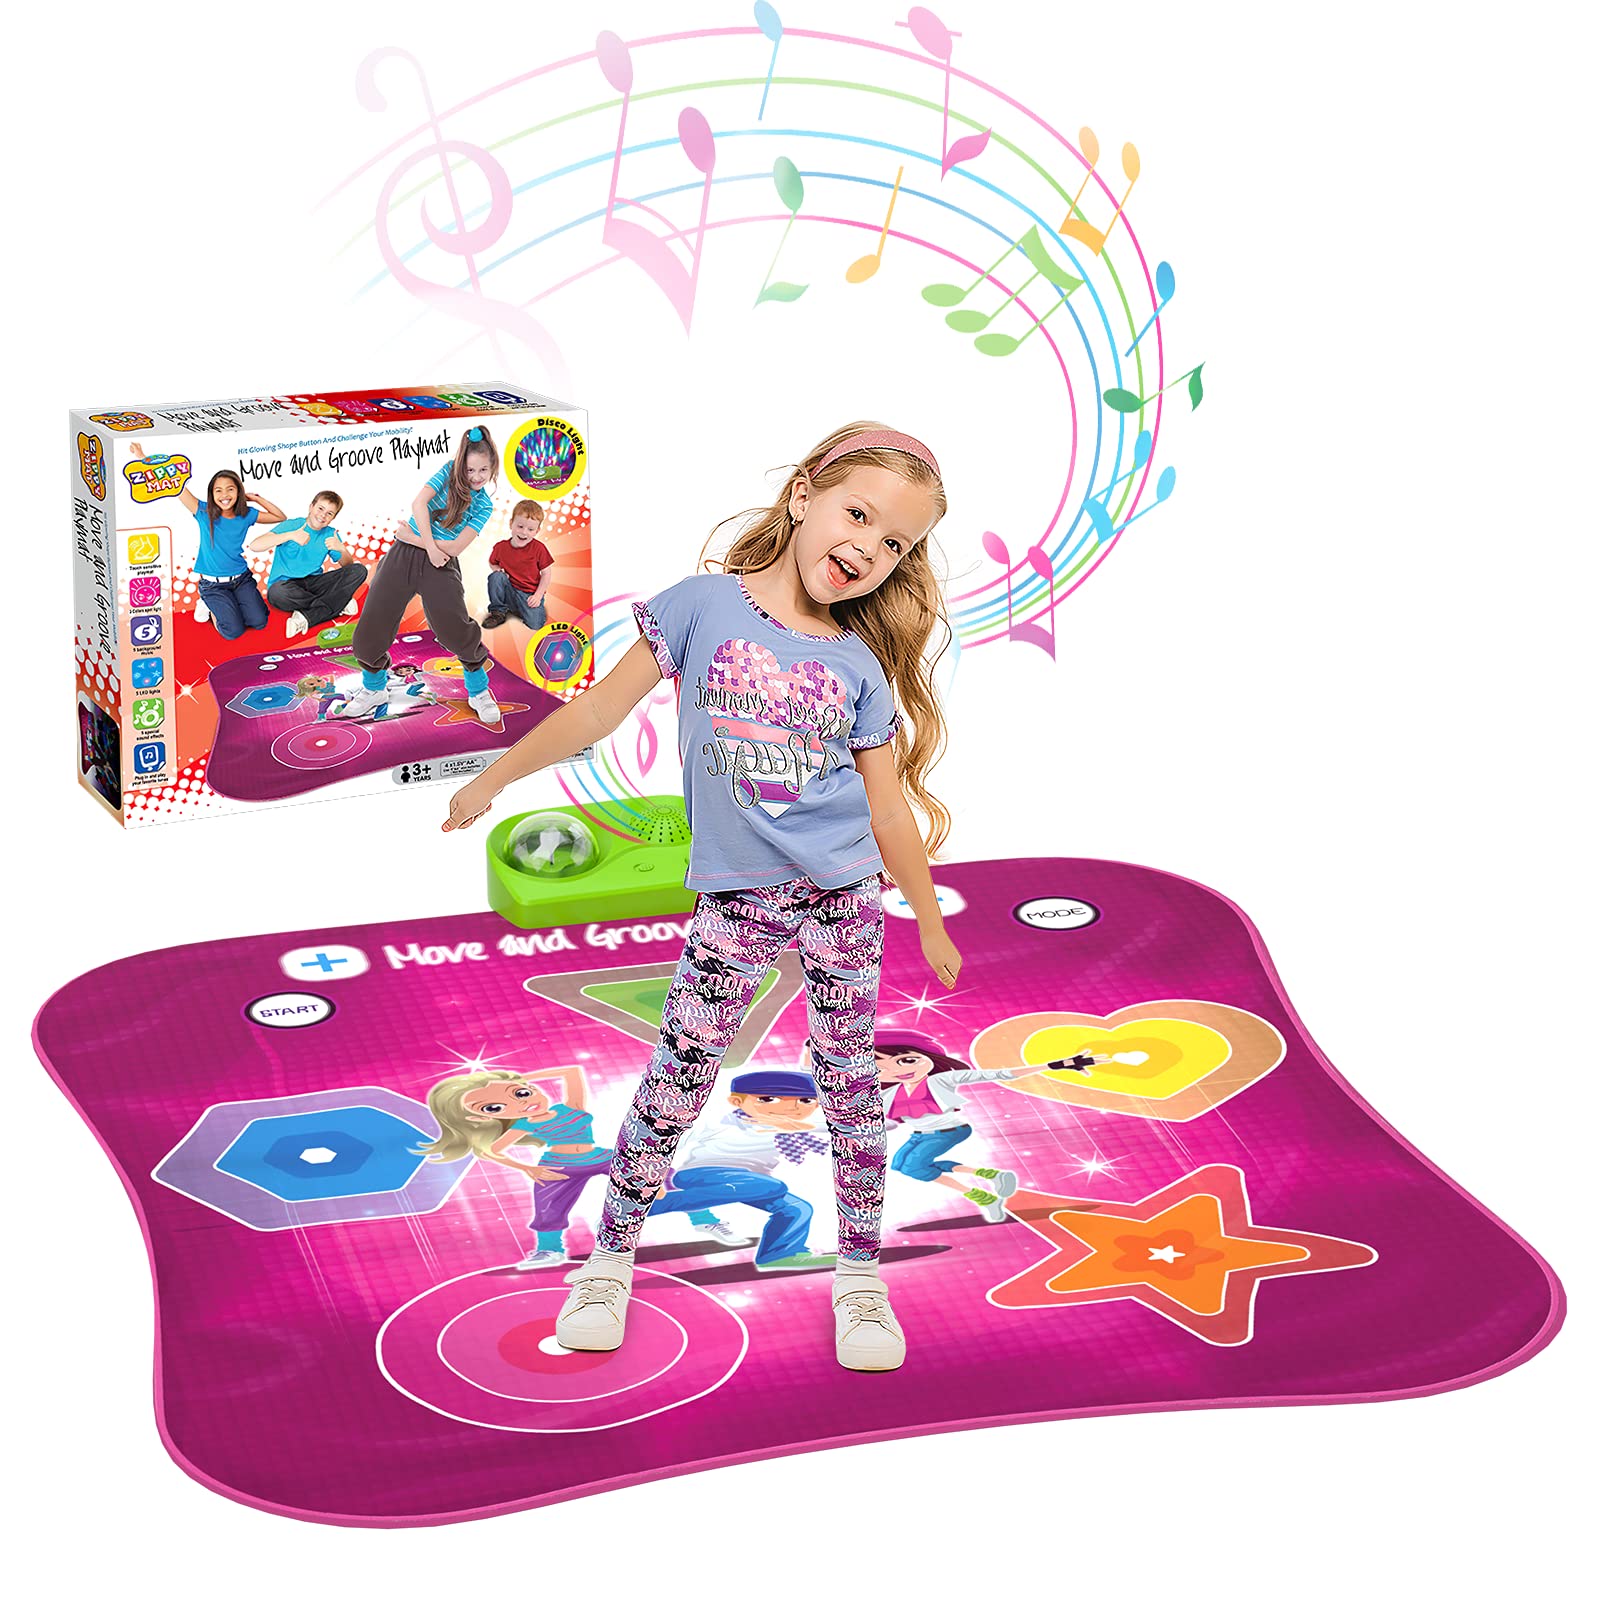 Dance Mat Kids, Light Up Electronic Dance Pad Christmas Birthday Gift Toy for Girl Boy Age 3 4 5 6 7 8 9 10 Year Old Dancing Game with Built-in / External AUX Music LED Disco Lights Adjustable Rhythm